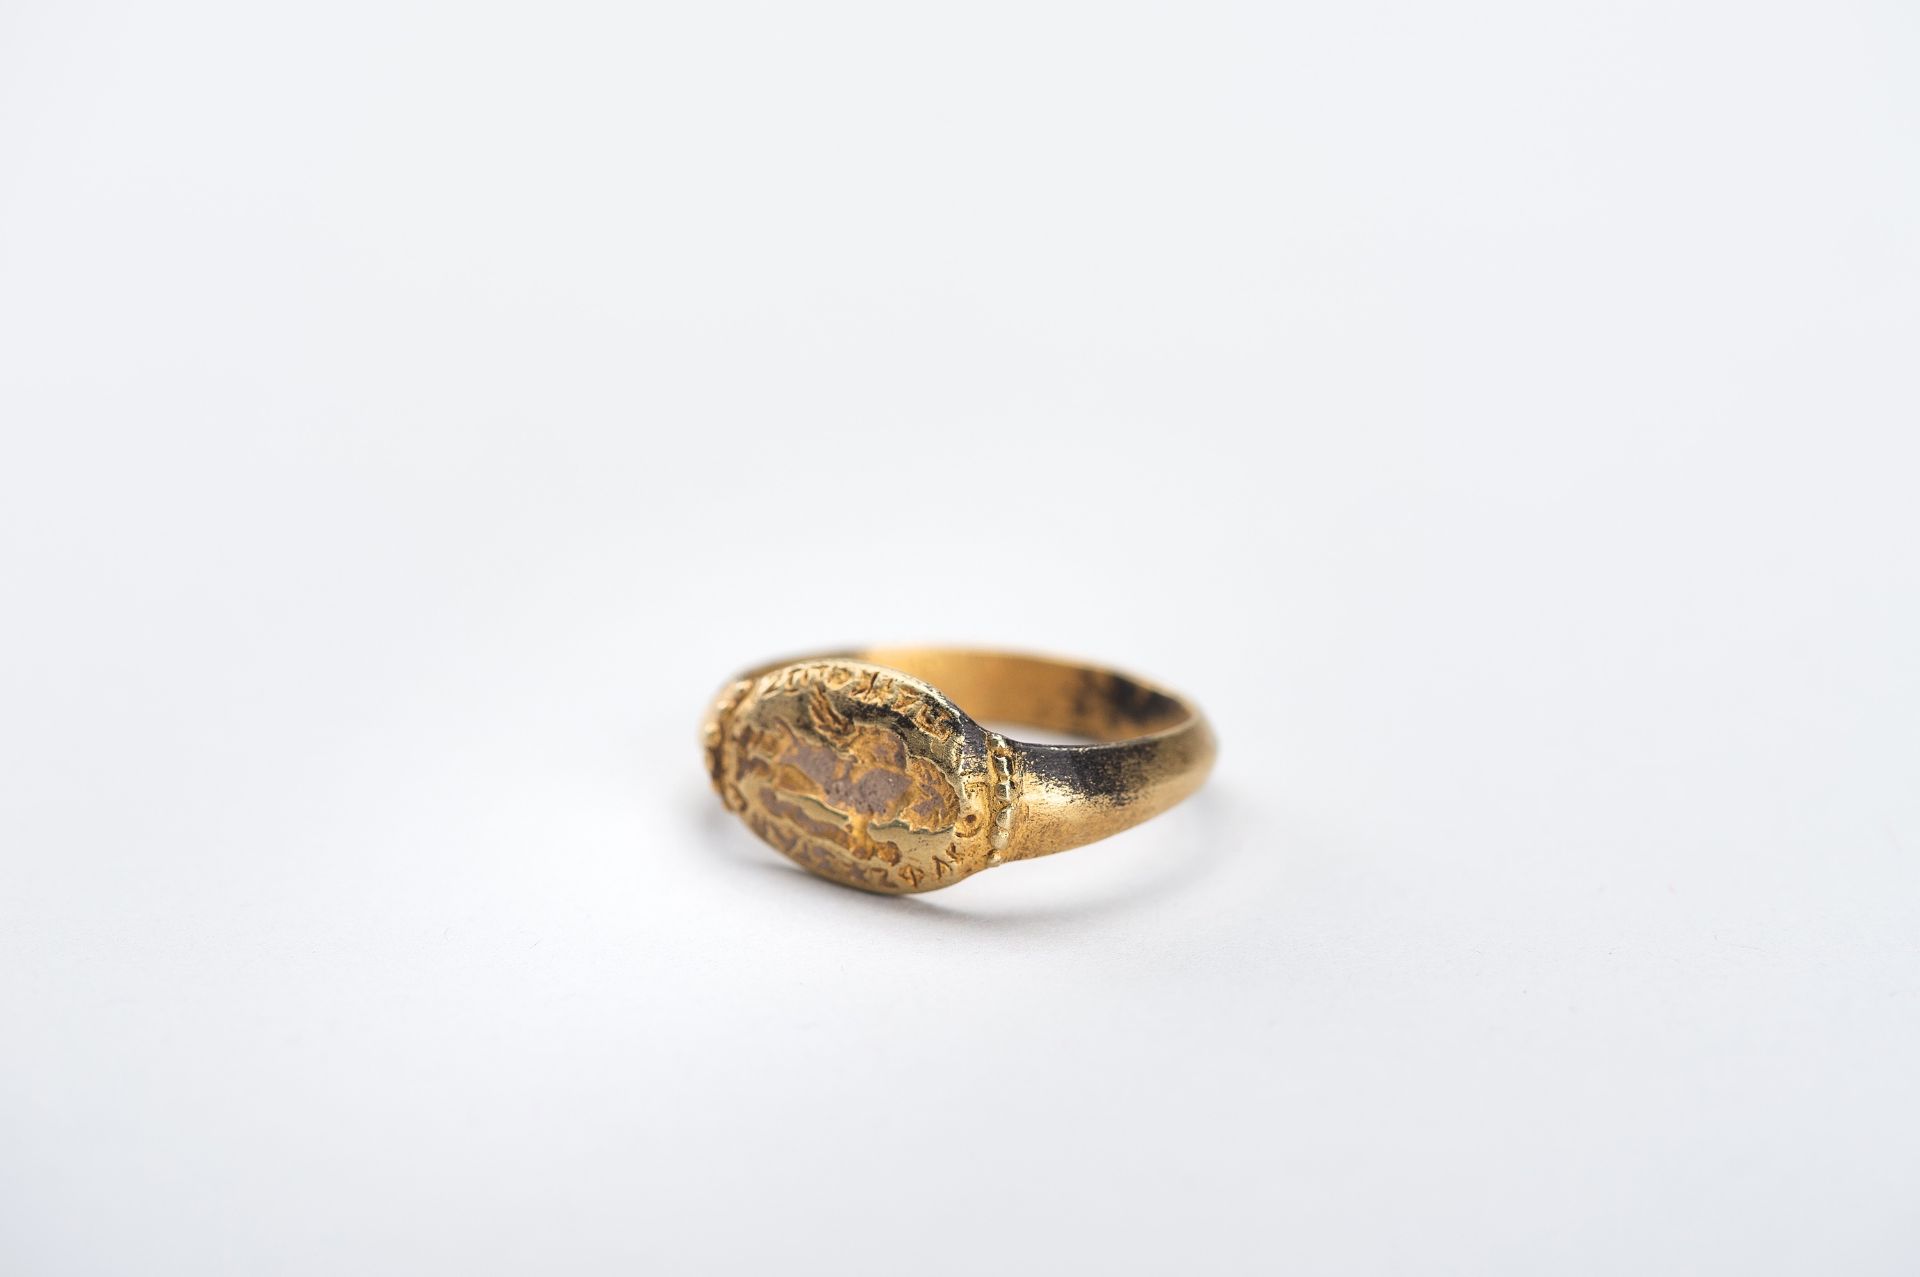 AN ANCIENT BACTRIAN GOLD SEAL RING - Image 6 of 10